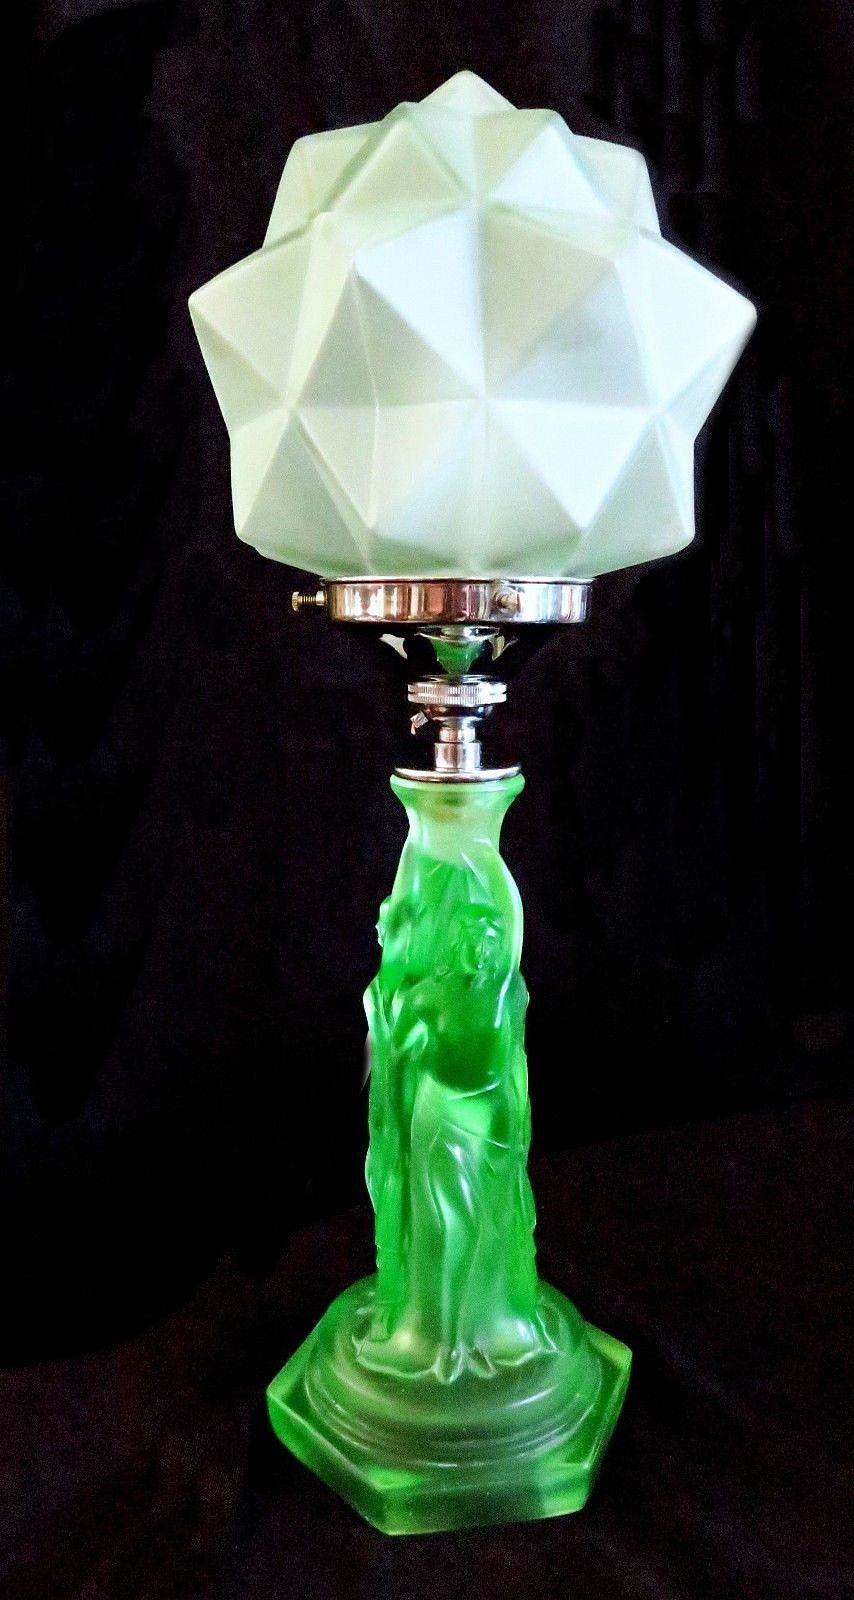 For your consideration is this tall and very elegant and original 1930s Art Deco three graces uranium glass table lamp. Features three semi nude females encircling to create the column of the lamp with a segmented glass shade. The green coloured